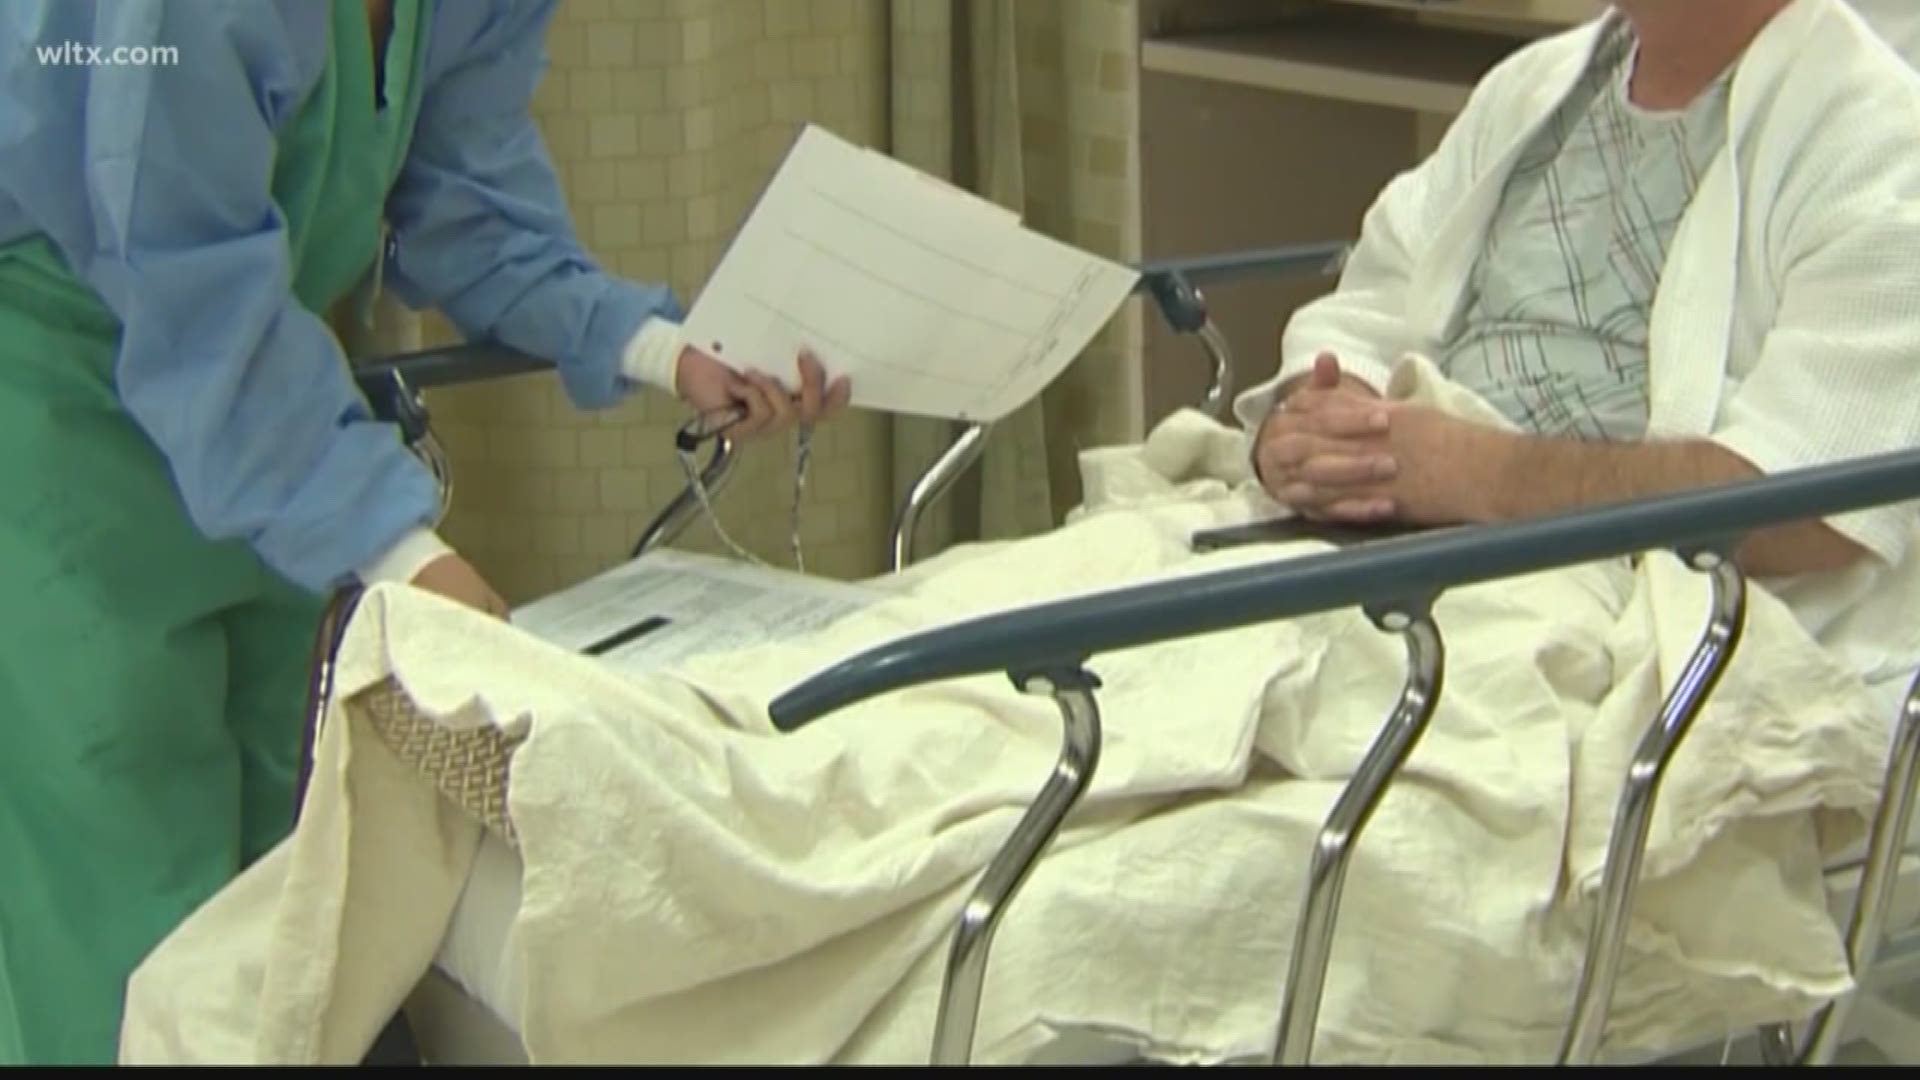 So far eight people in the state have died of the flu